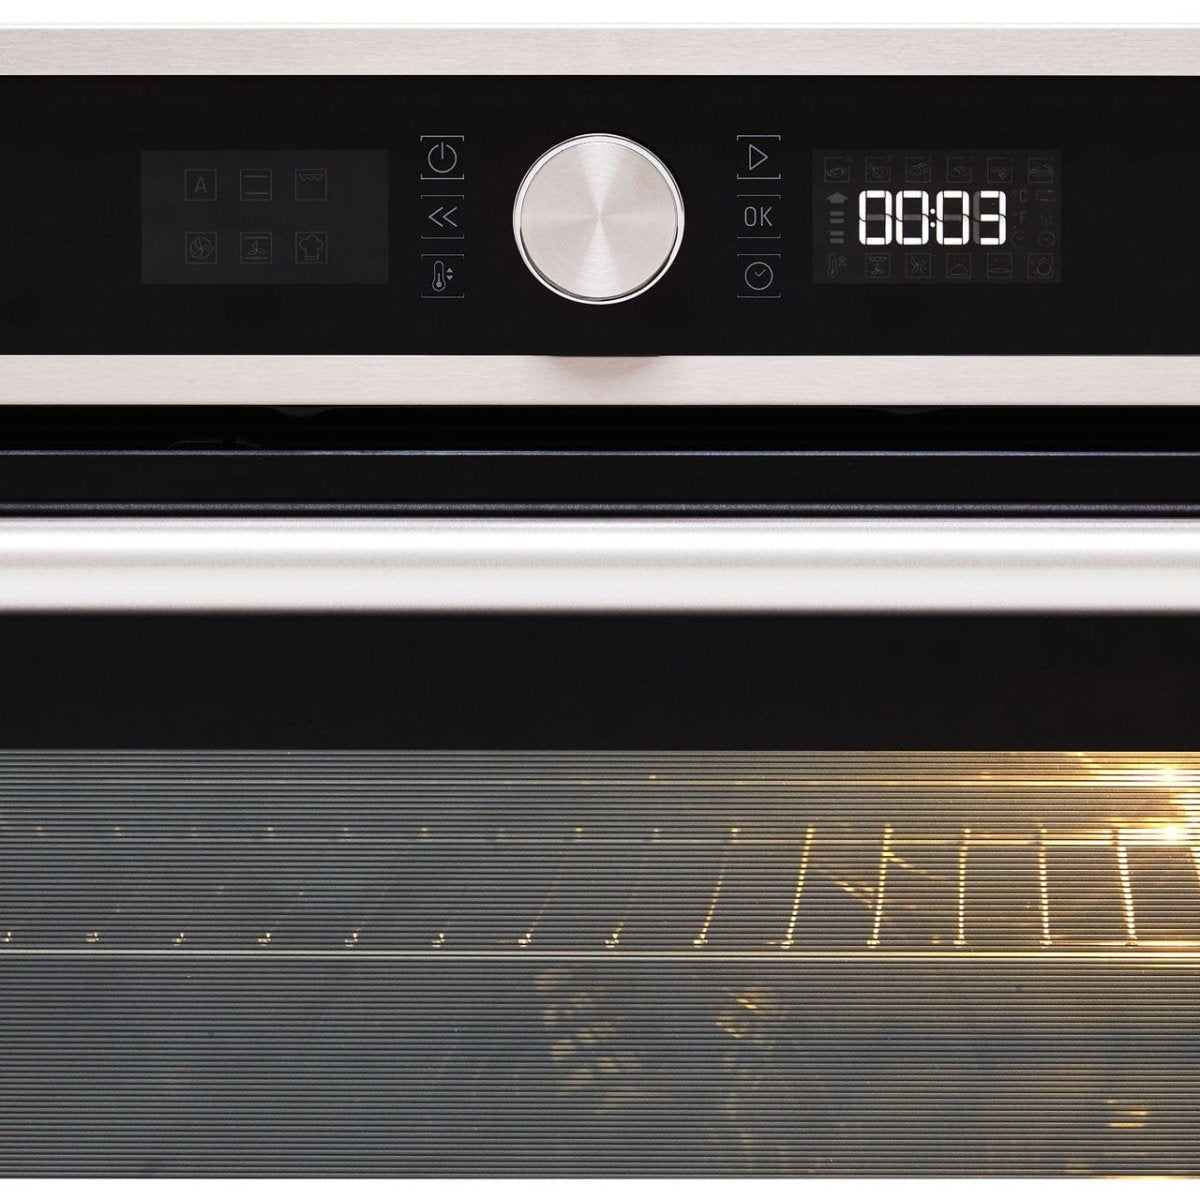 Hotpoint Class 4 SI4854HIX Built In Electric Single Oven-Stainless Steel-A+ Rated | Atlantic Electrics